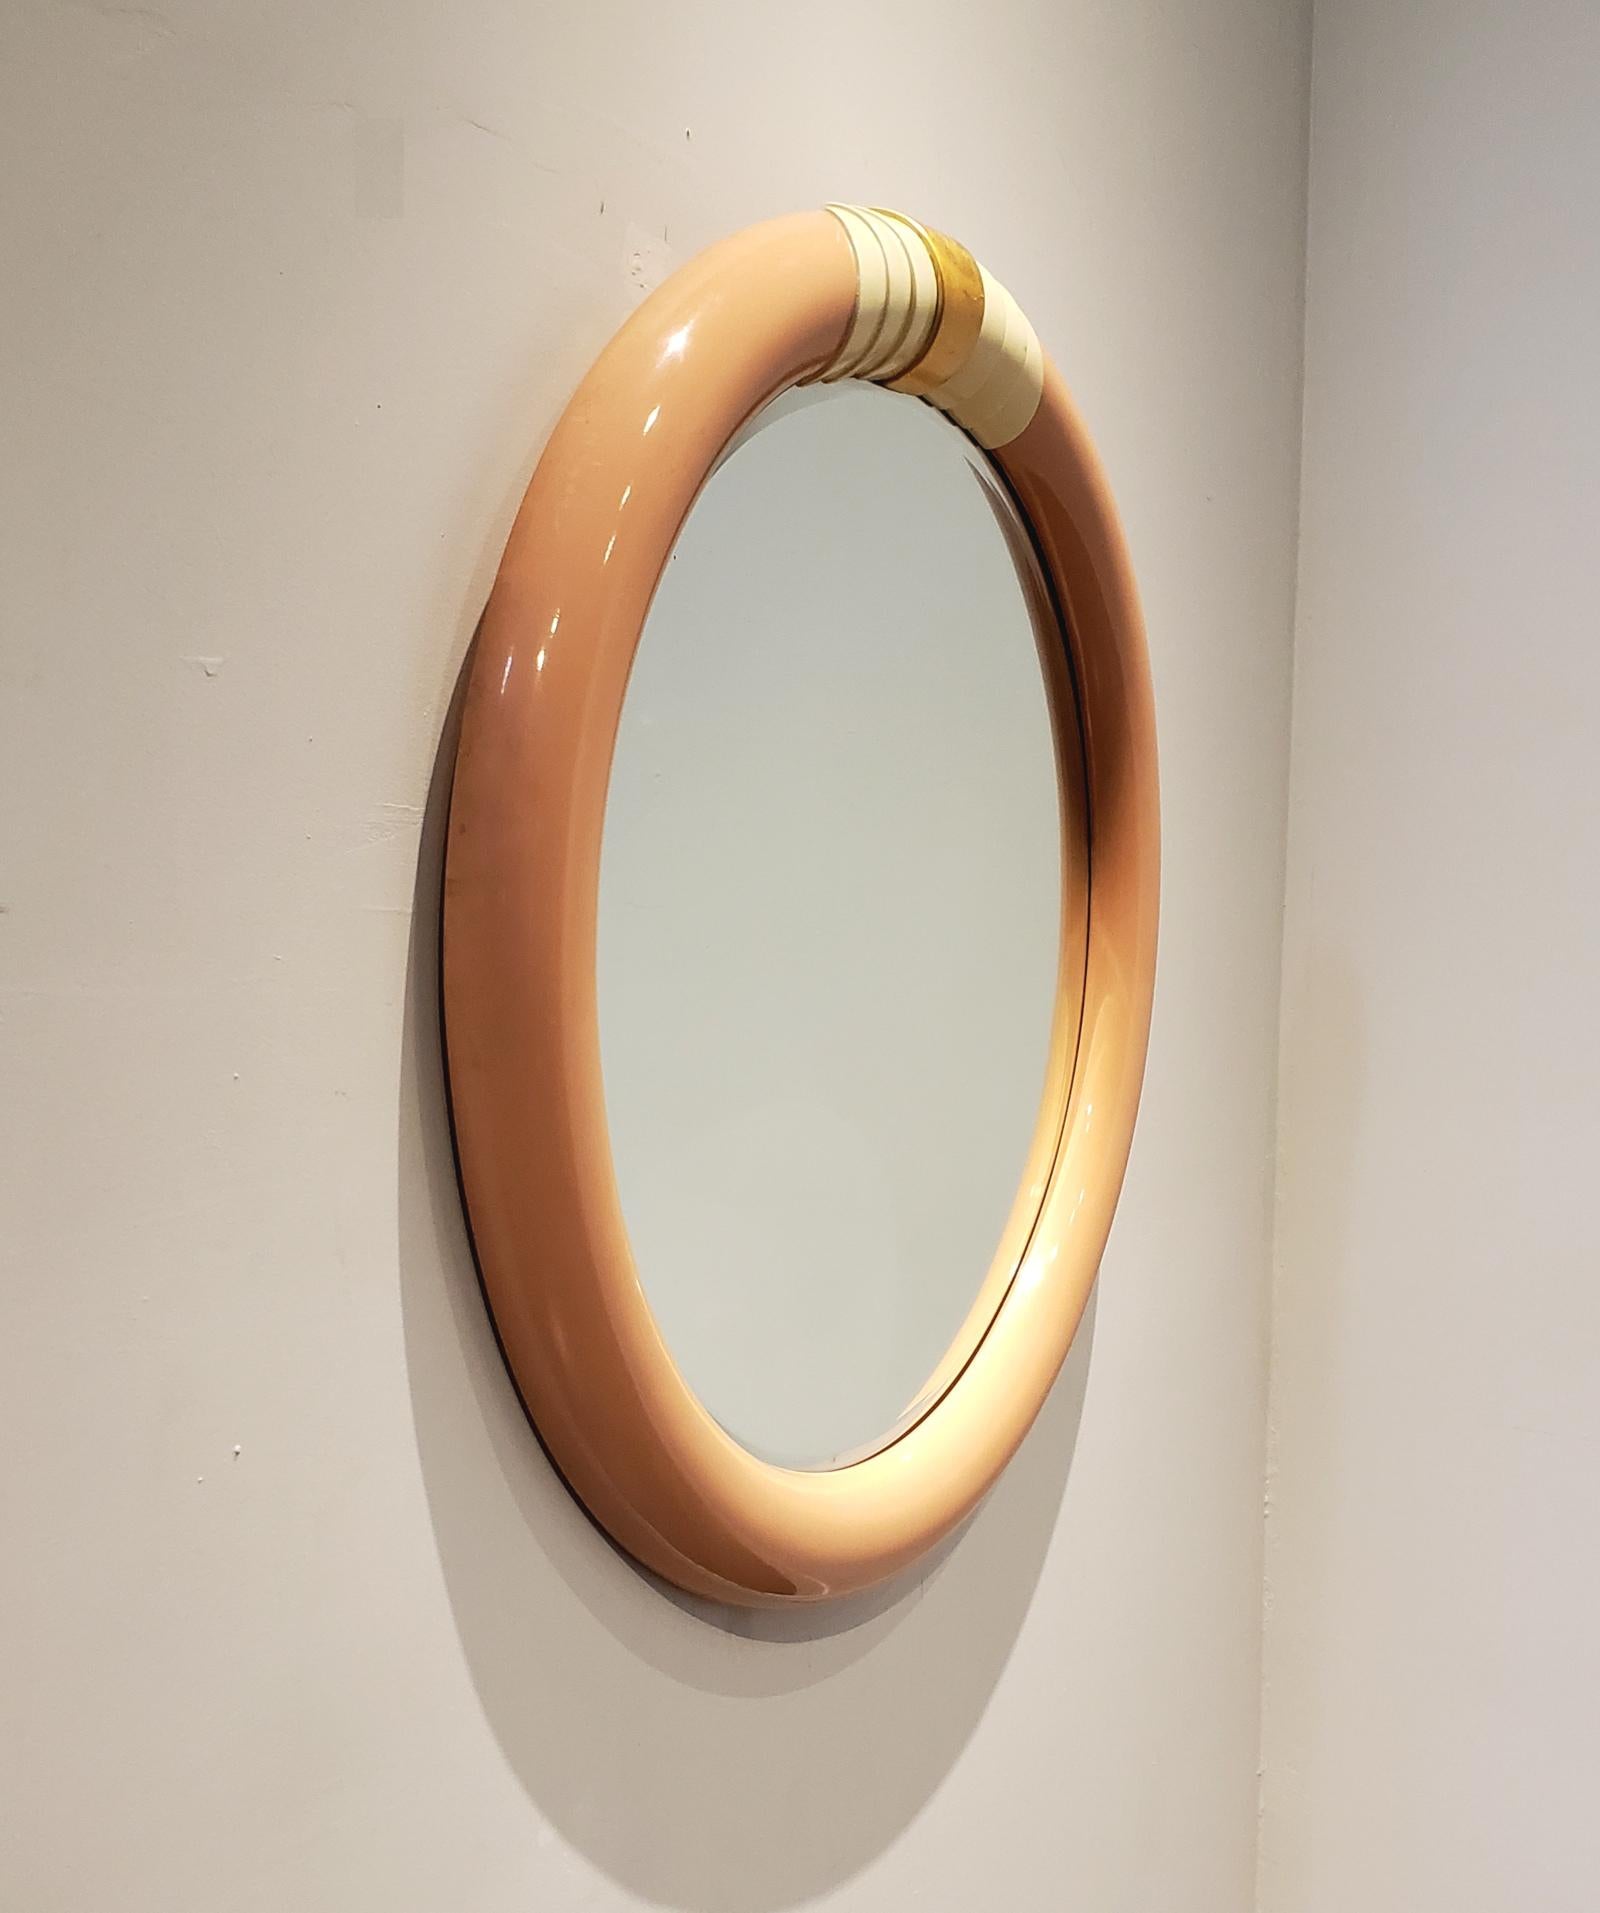 1980s pink circular wall mirror with white and gold decorative accents on top. Lovely, glossy blush pink color. Heavy, quality construction.